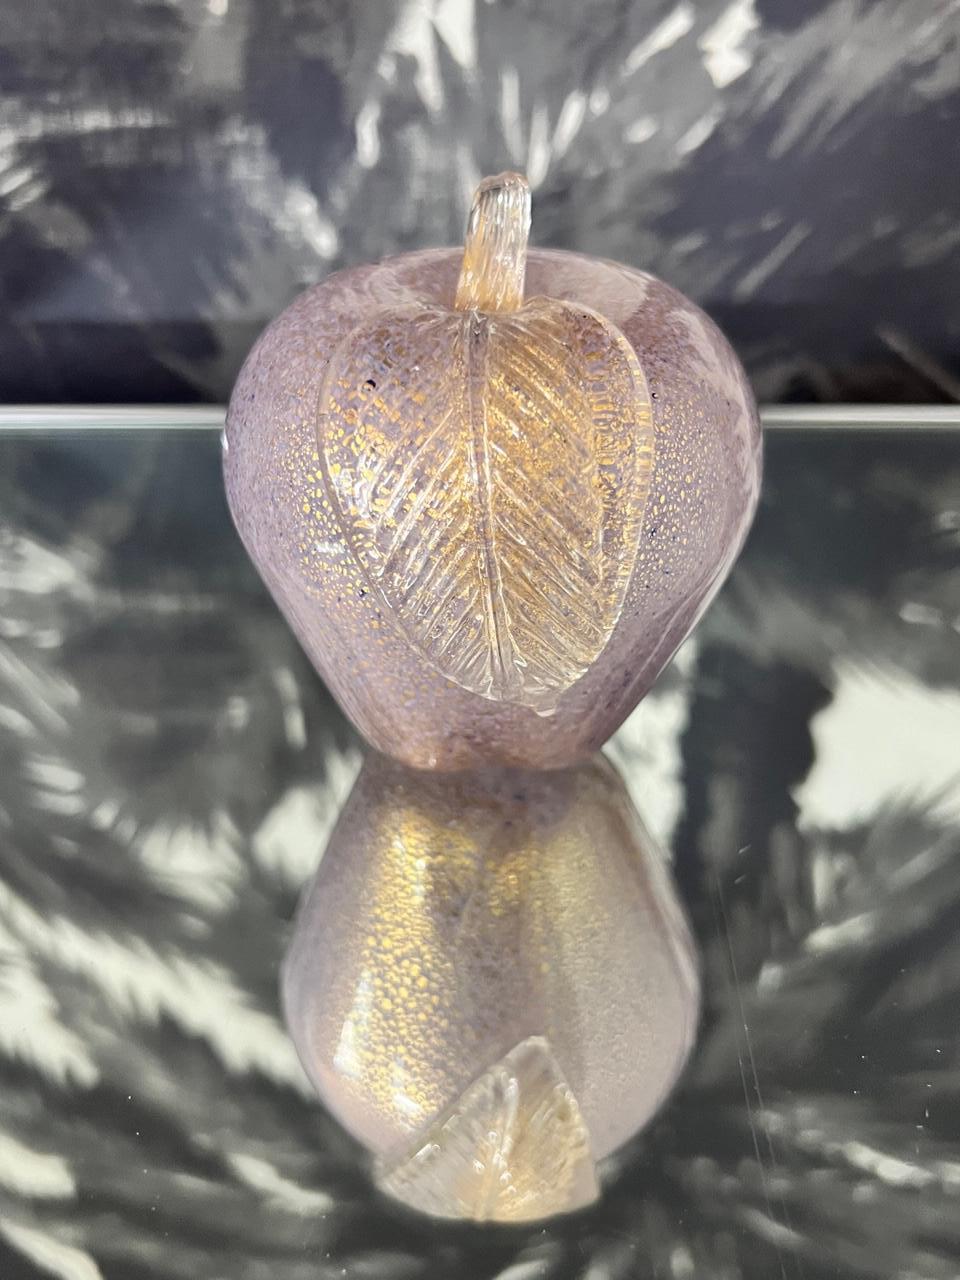 Late 20th Century Murano Pear and Apple Sculptures in Lilac Glass with Gold Flecks, C. 1980